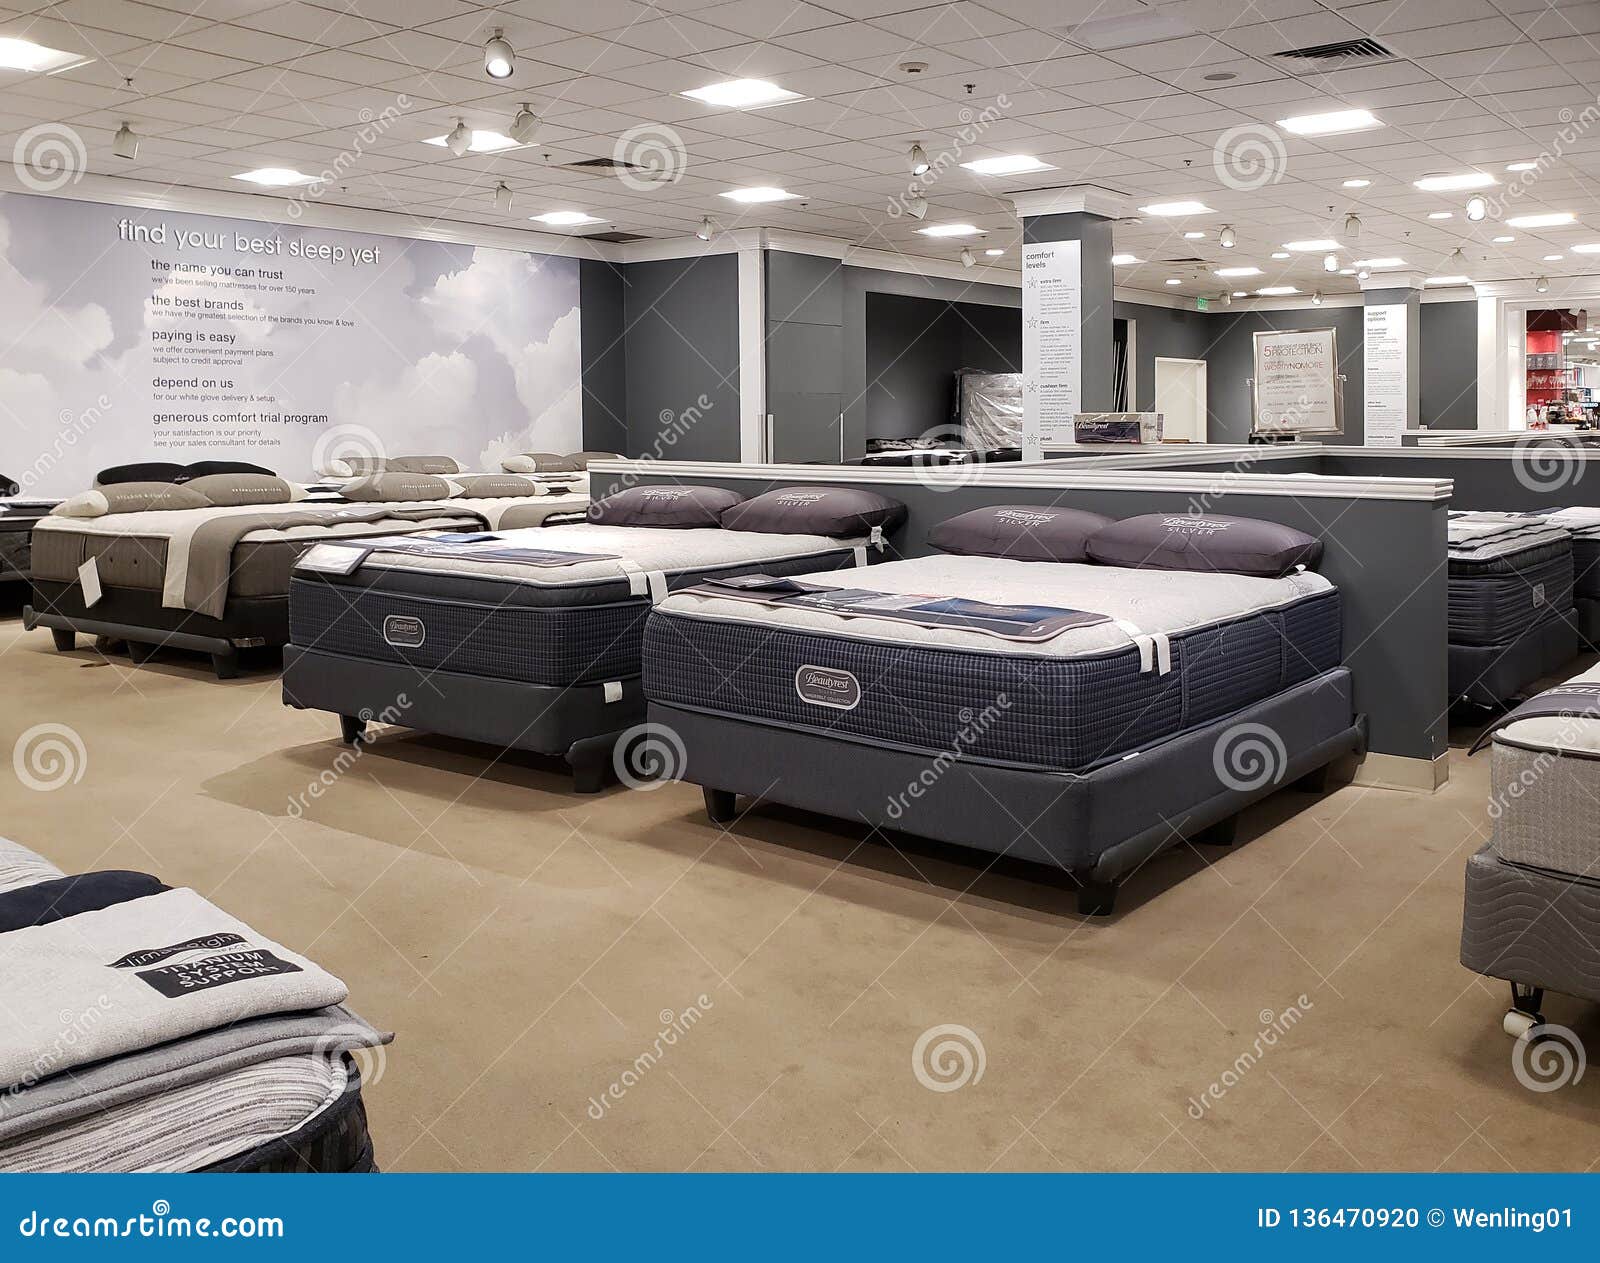 Nice Beds And Mattresses For Sale At Store Macy`s Editorial Image - Image of relax, frame: 136470920